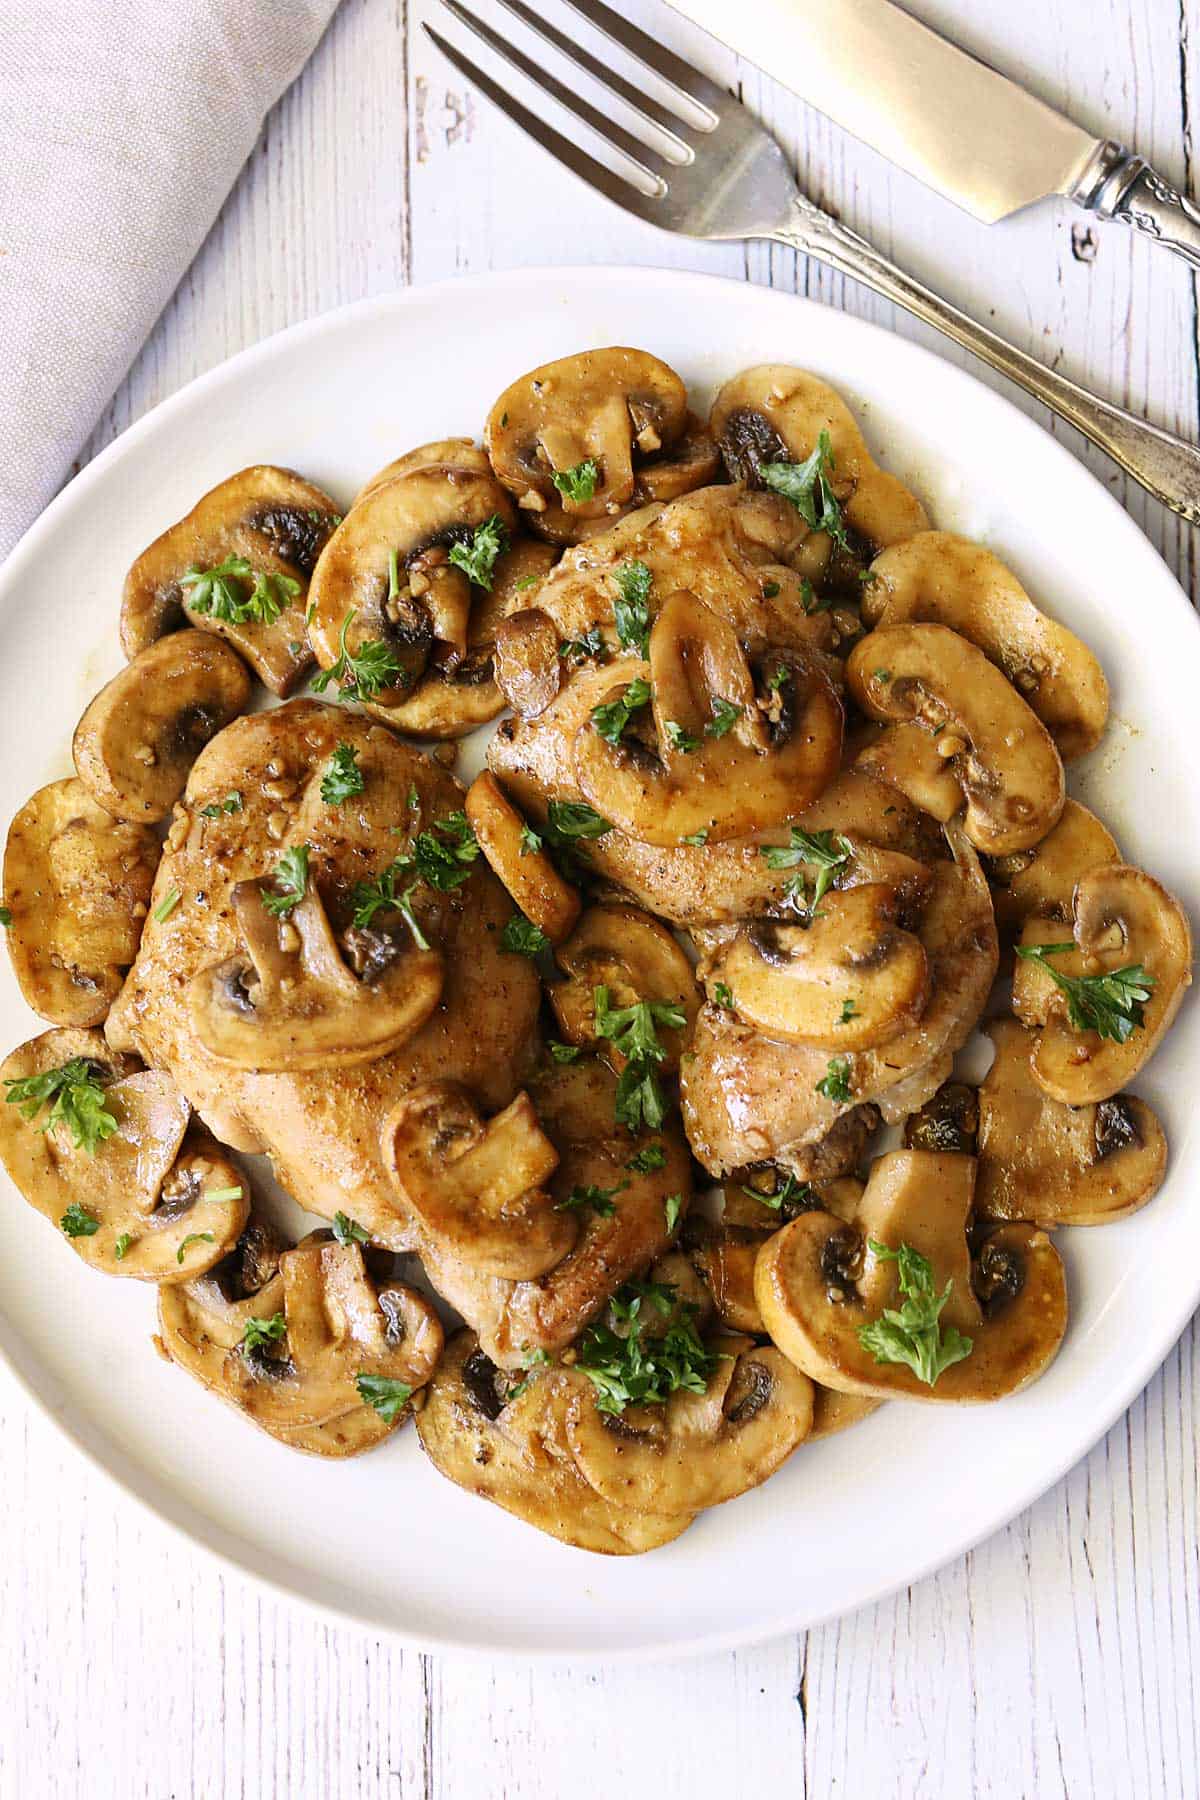 Chicken and mushrooms served on a white plate with utensils and a napkin. 